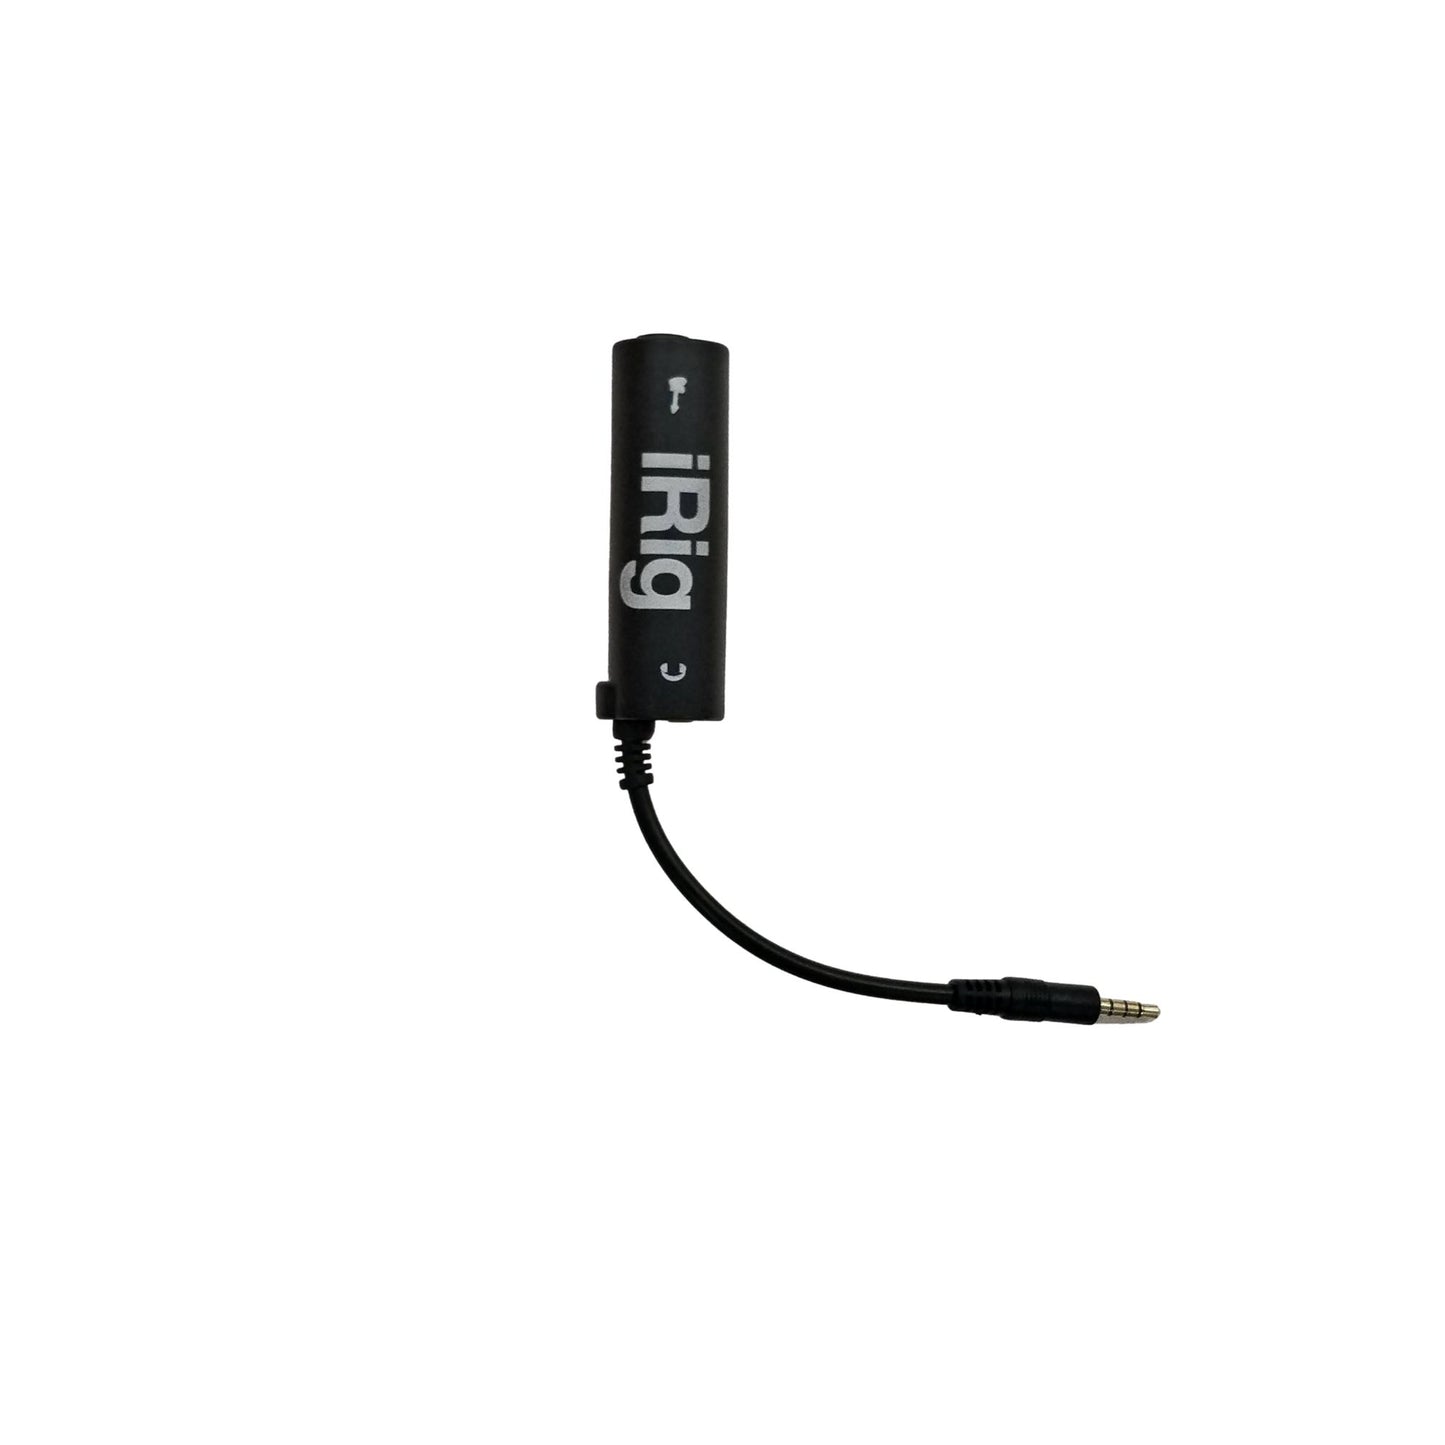 6.5mm to 3.5mm TRRS Adapter - iPhone Guitar Adapter - 1/4 Inch to 1/8 Inch Connector - iRig